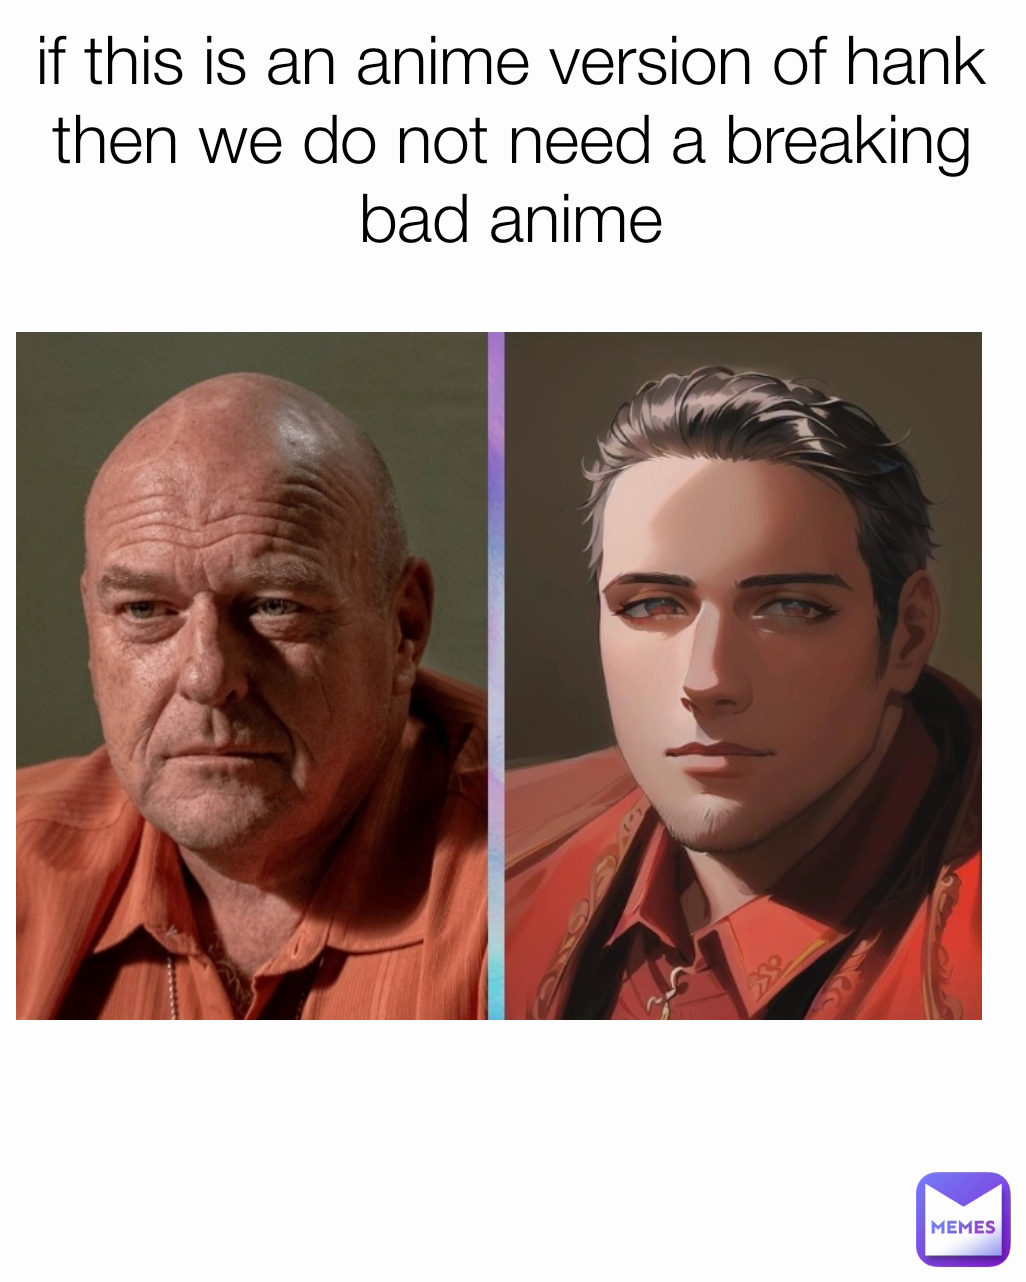 breaking bad Archives - Anime Herald